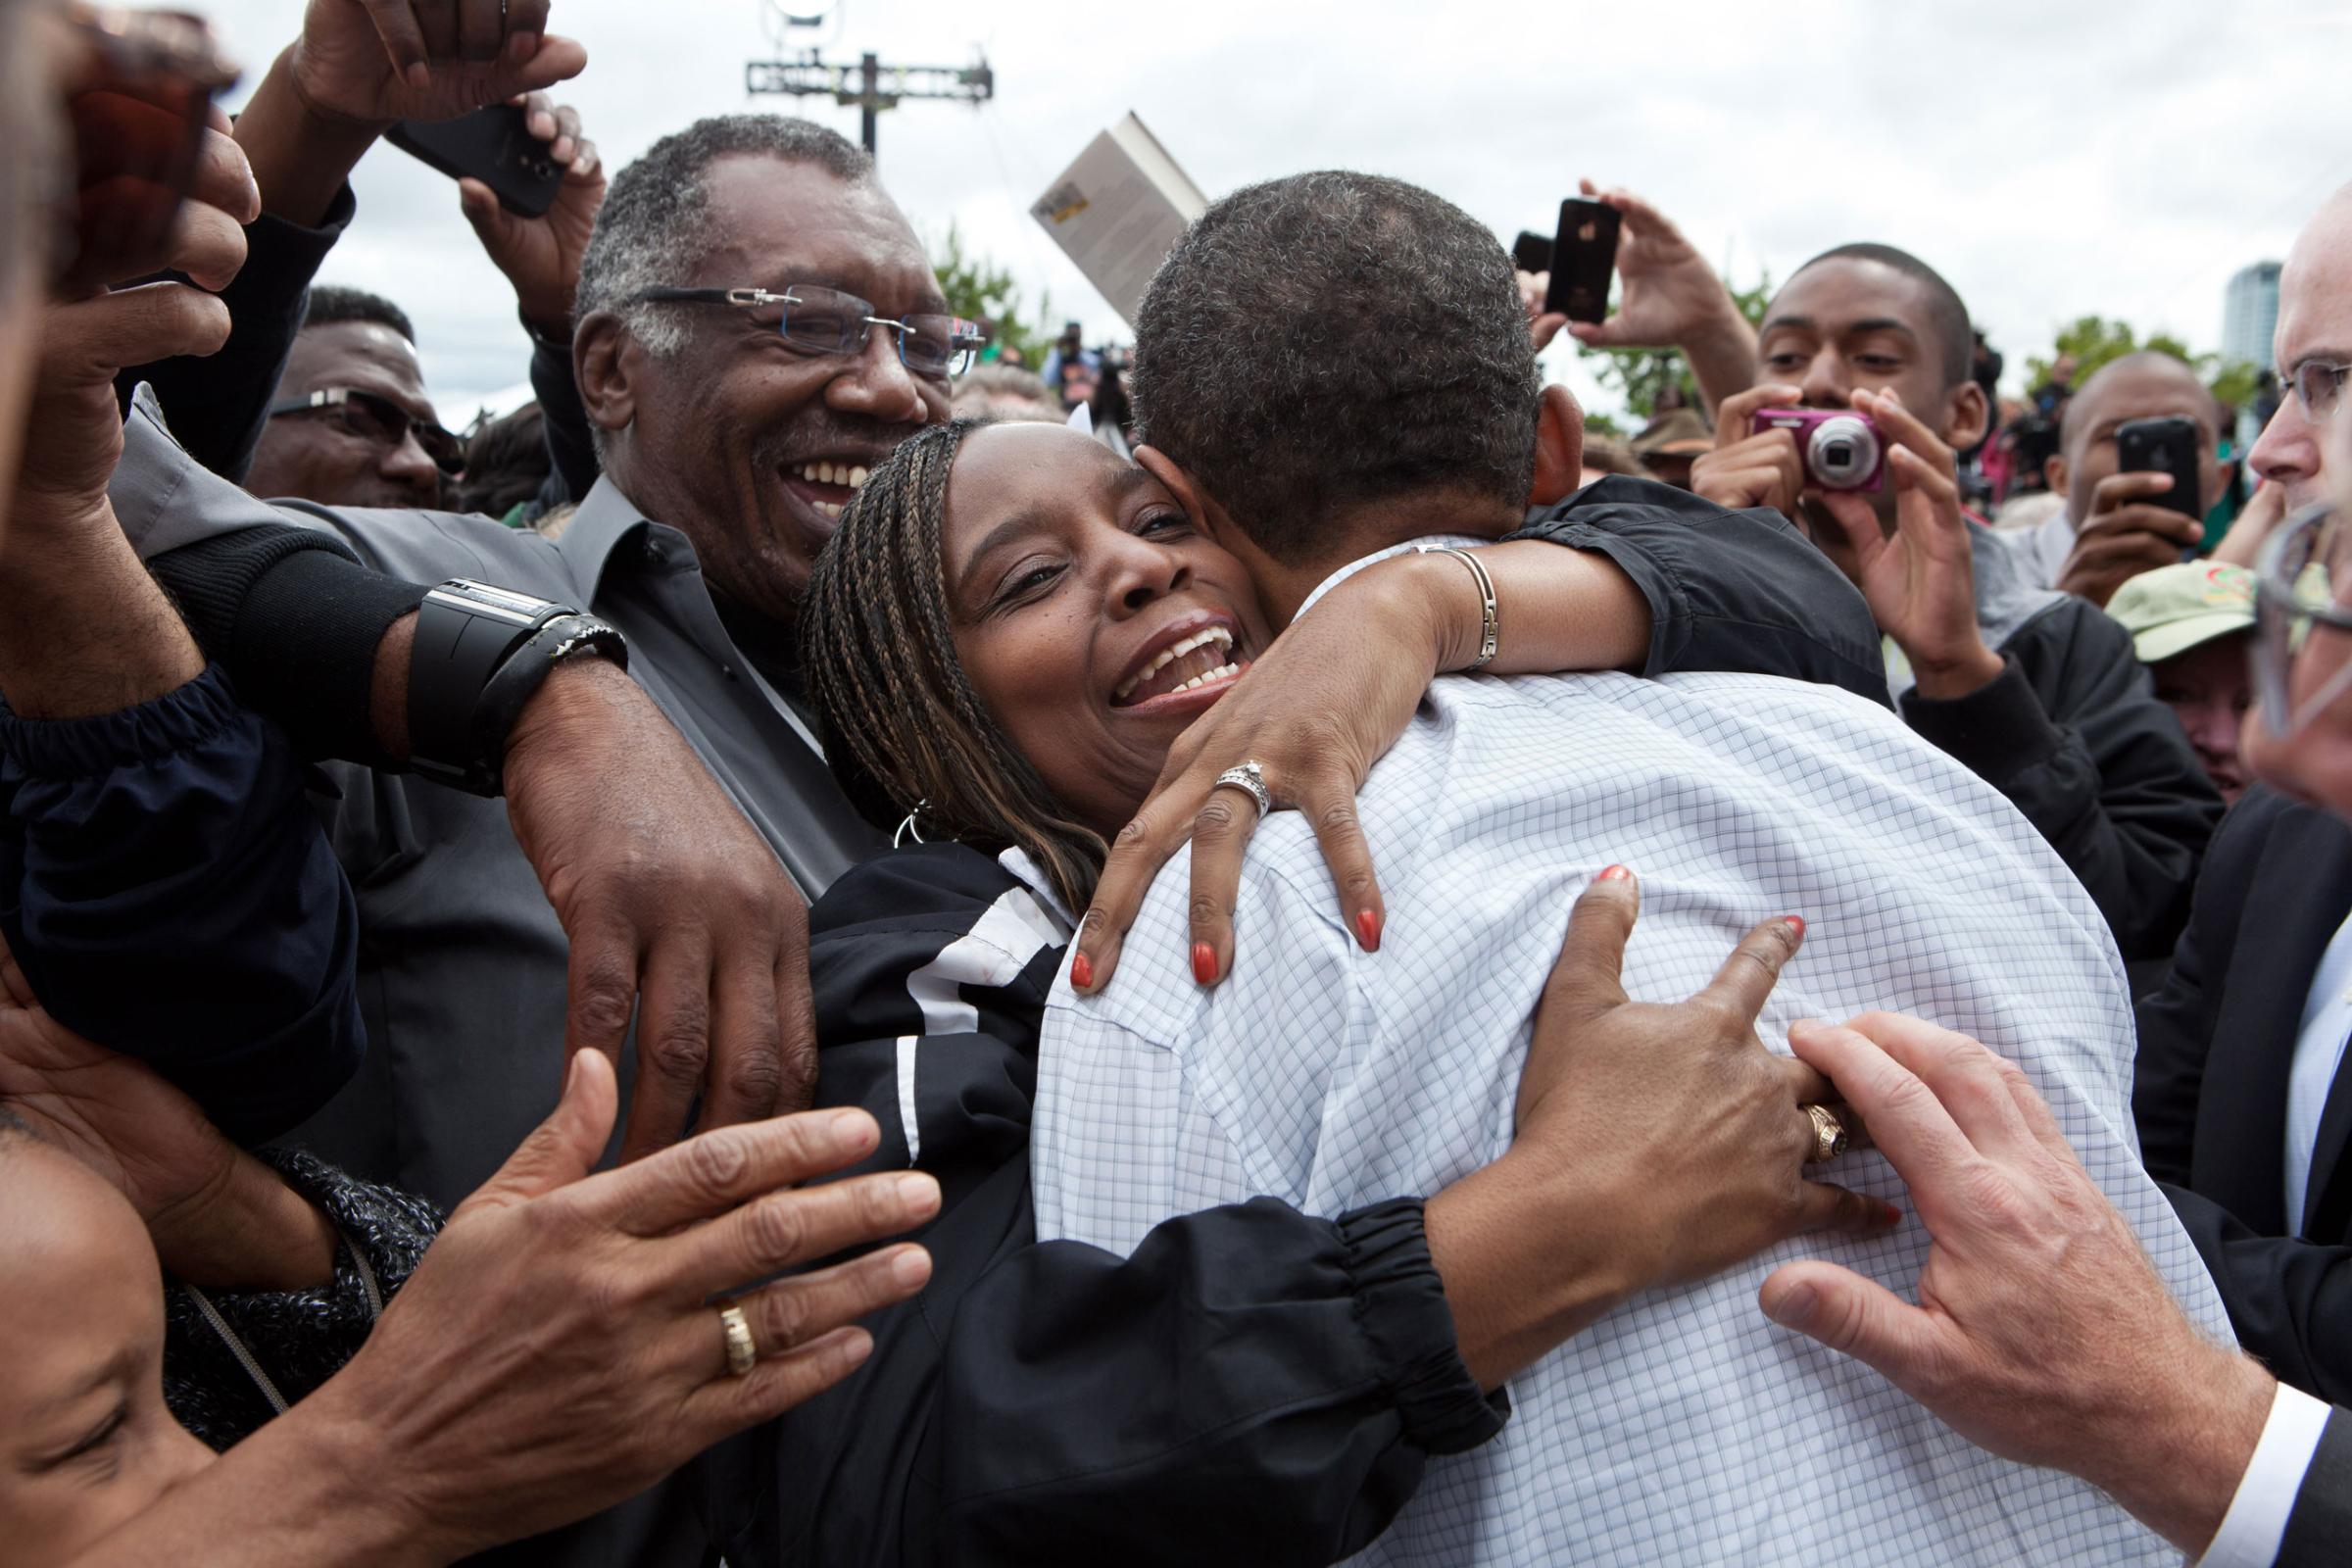 President Barack Obama hugs a woman in the crowd after addressing the Labor Day celebration in Detroit, Mich., Sept. 5, 2011.